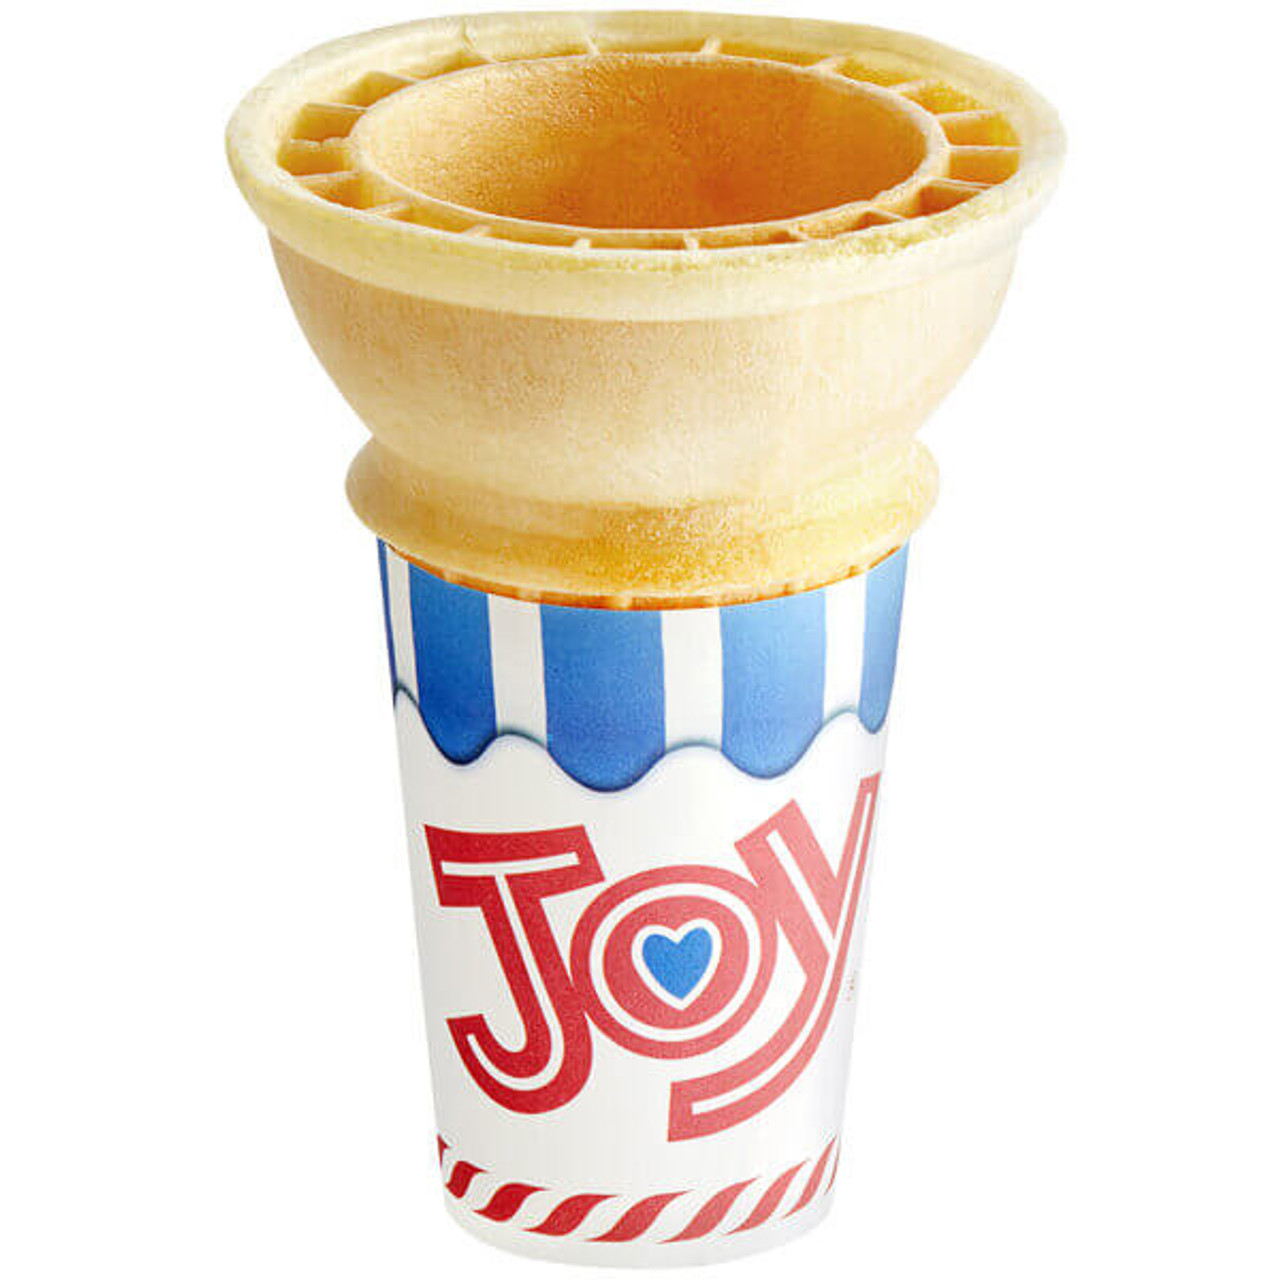 JOY #60 Flat Bottom Jacketed Cake Cone - 484/Case | for Multi-Scoop Treats - Chicken Pieces